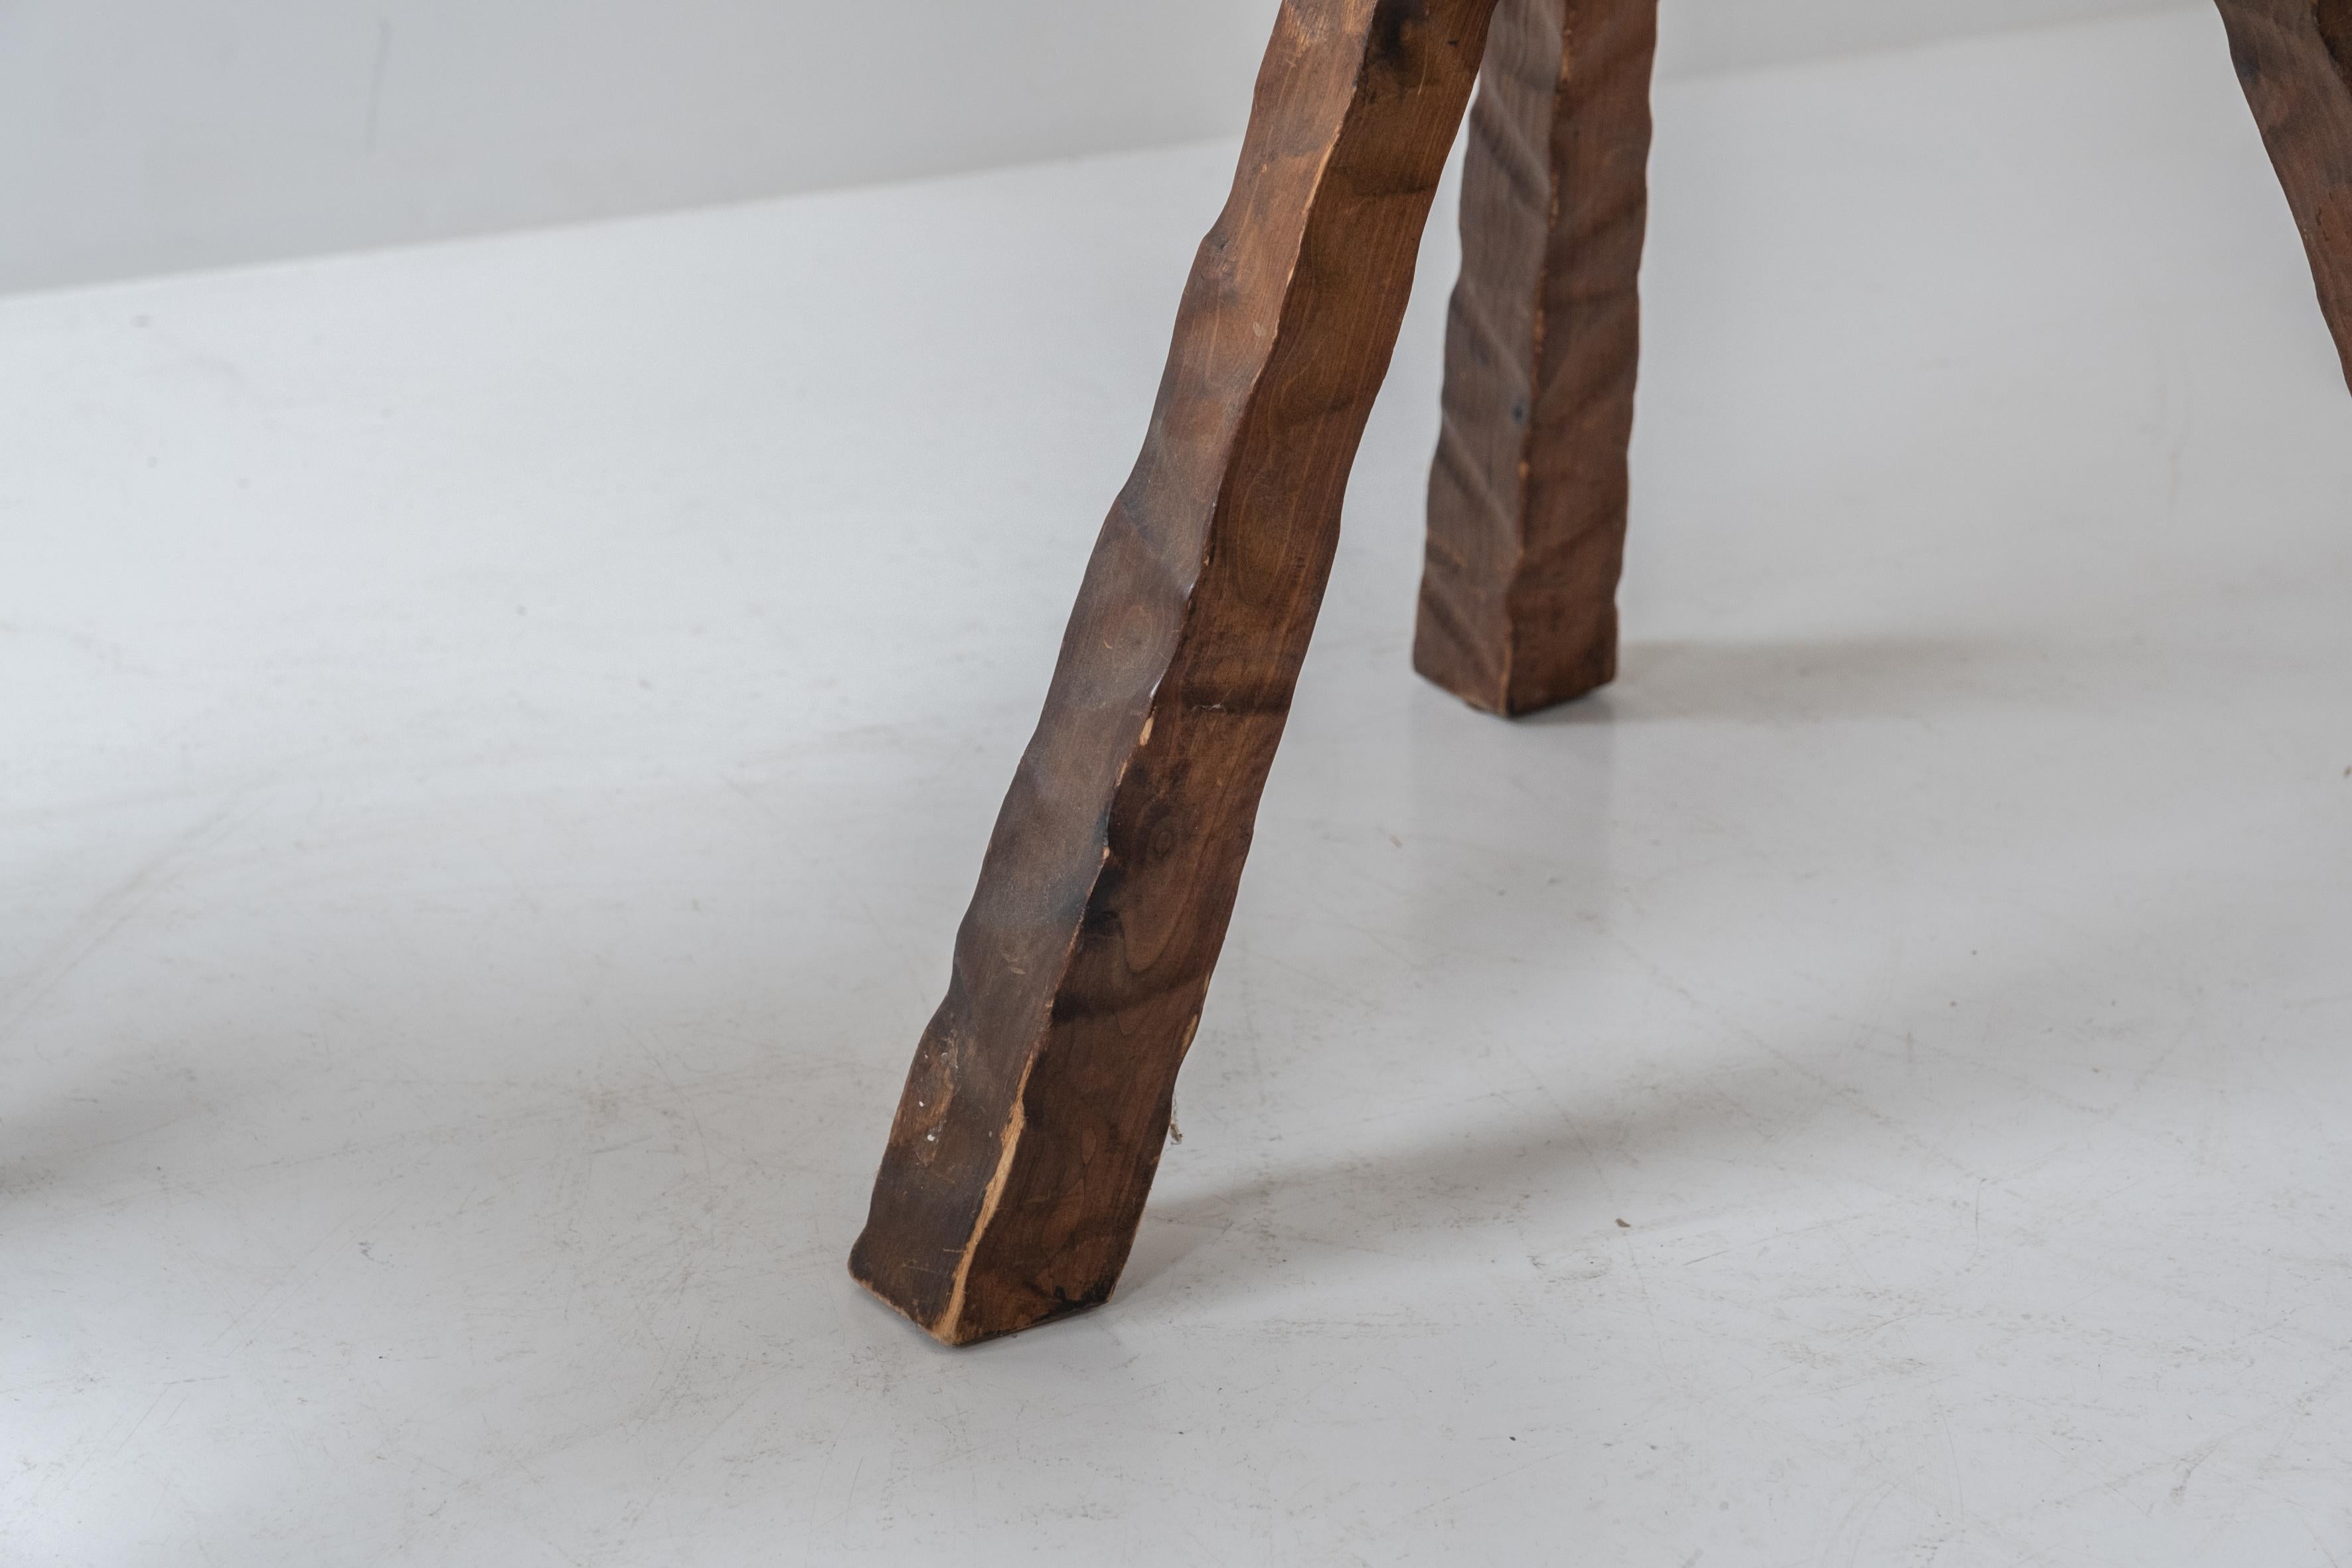 Set of 2 Brutalist tripod stools from Spain, designed in the 1960s.  8